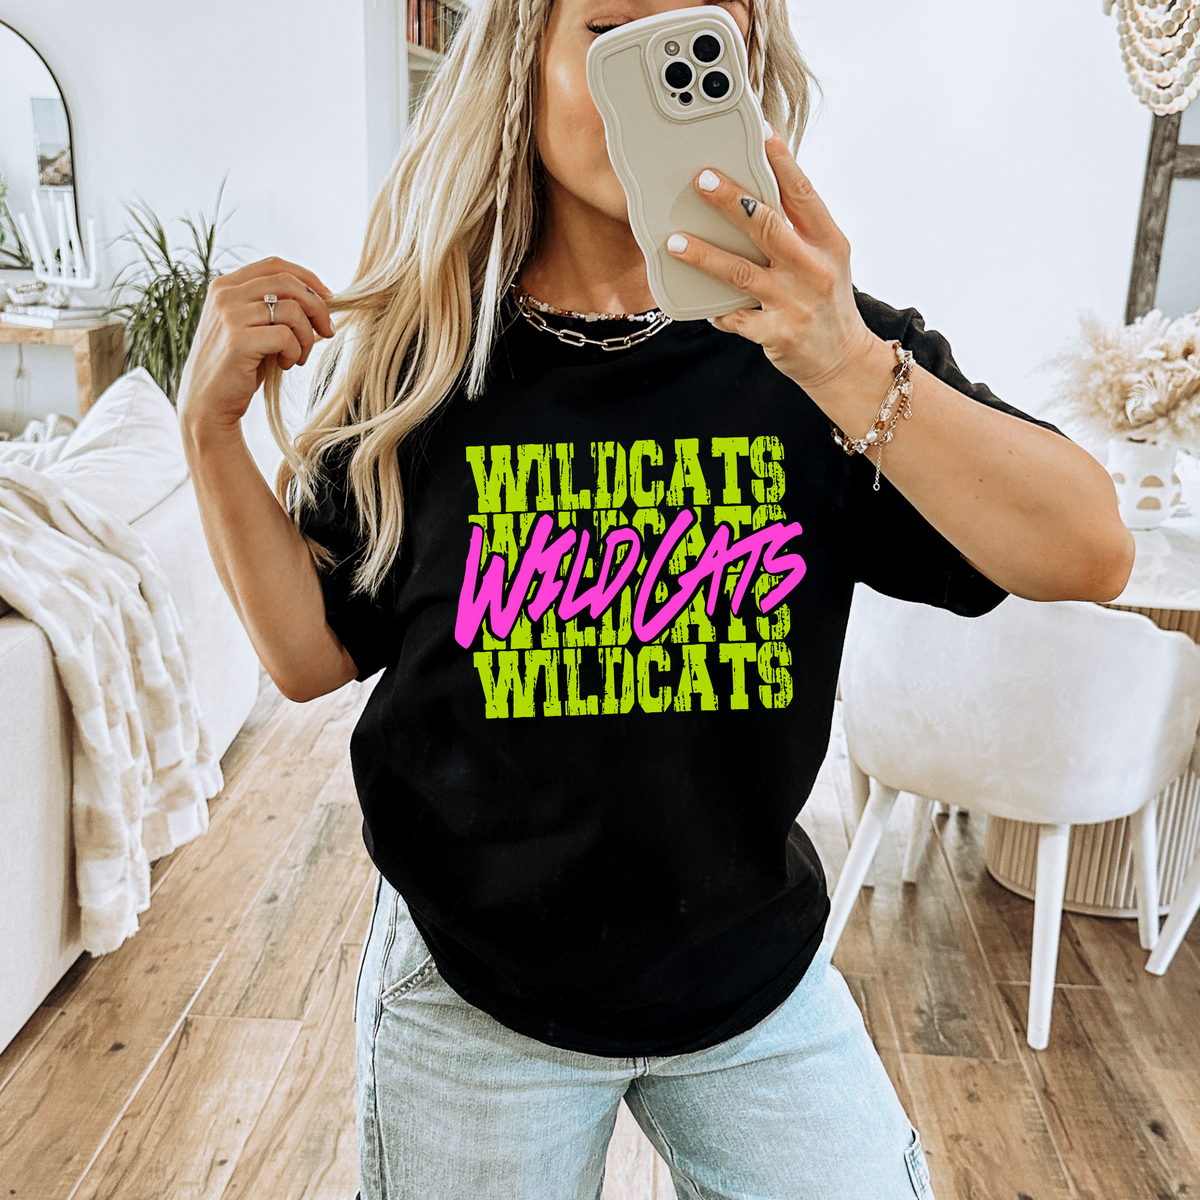 Wildcats Stacked Cutout Bright Yellow & Pink Digital Design, PNG